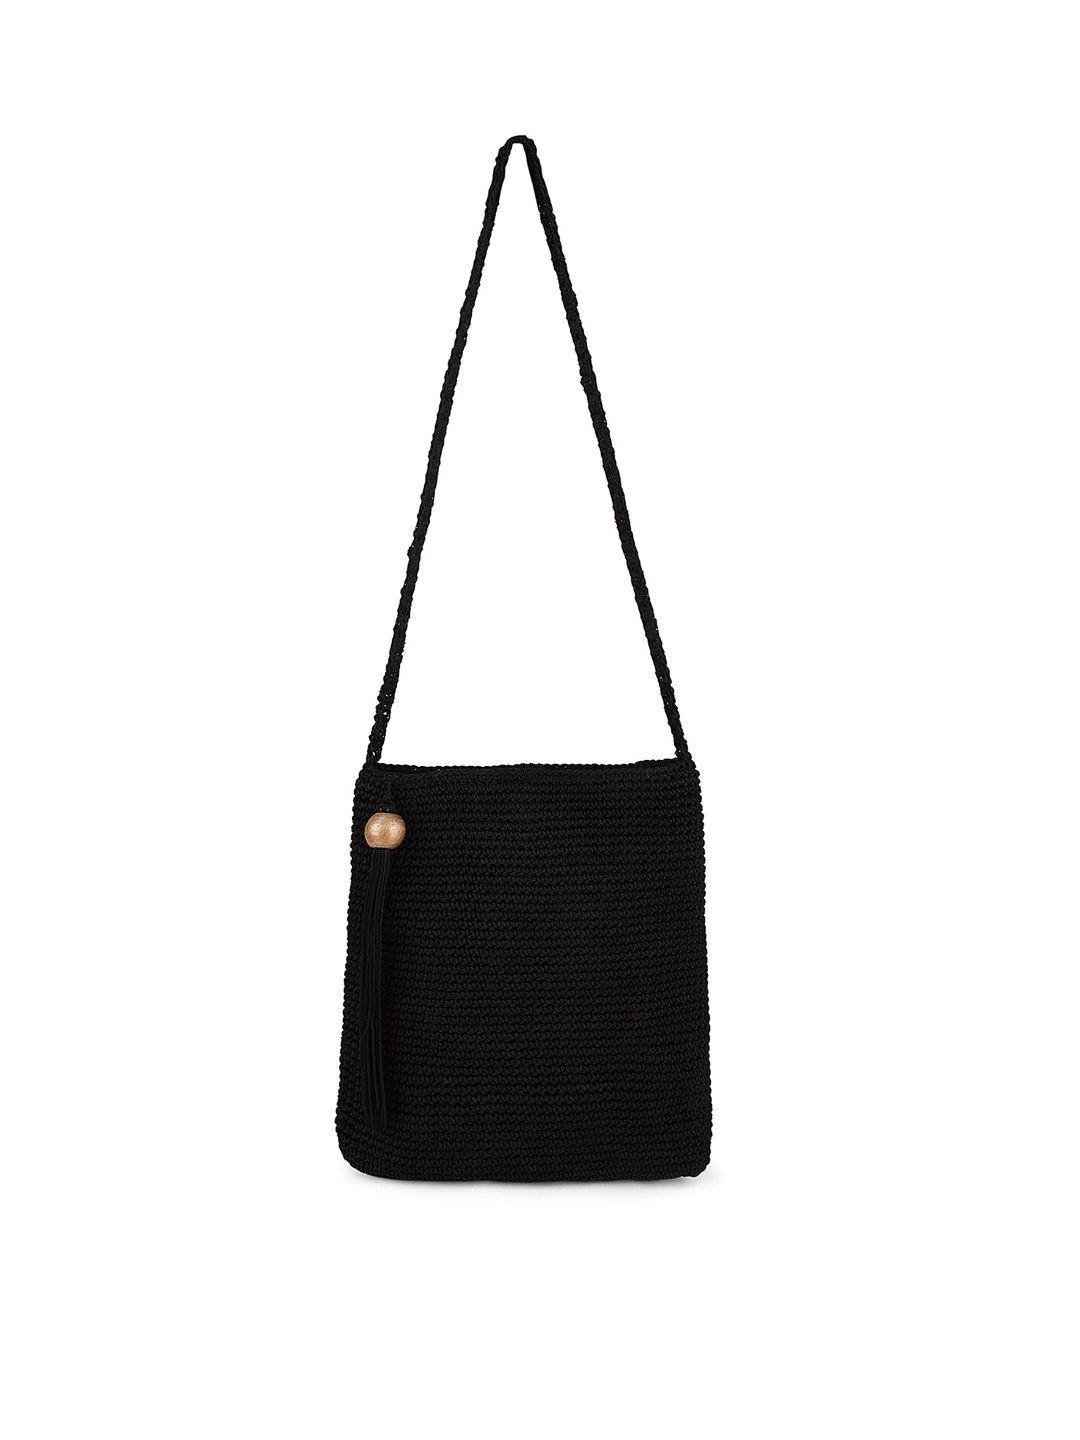 rediscover fashion shopper sling bag with tasselled